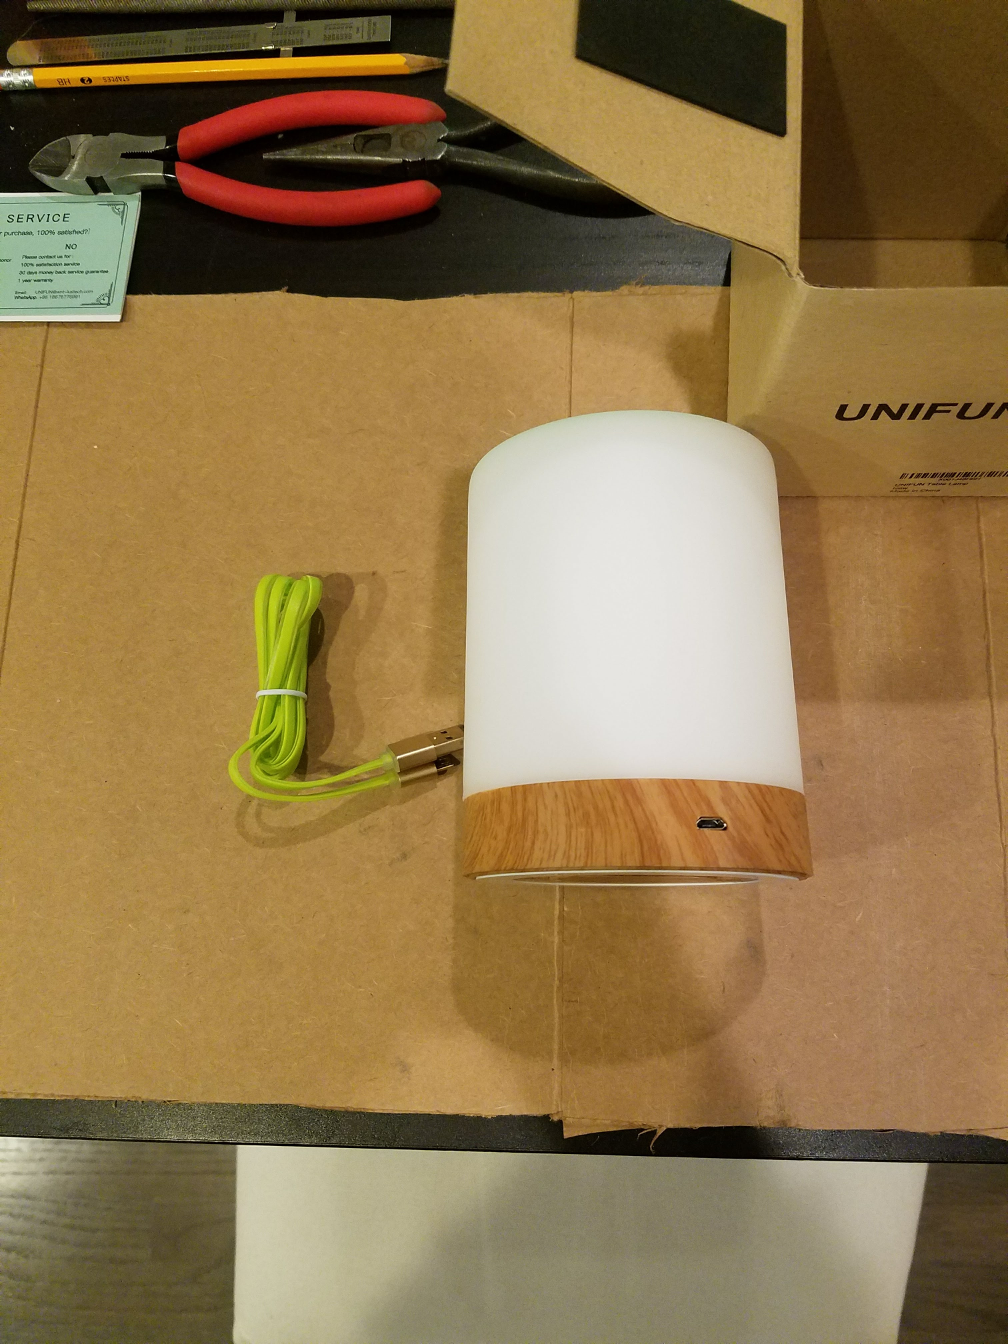 Unifun Touch Lamp contents